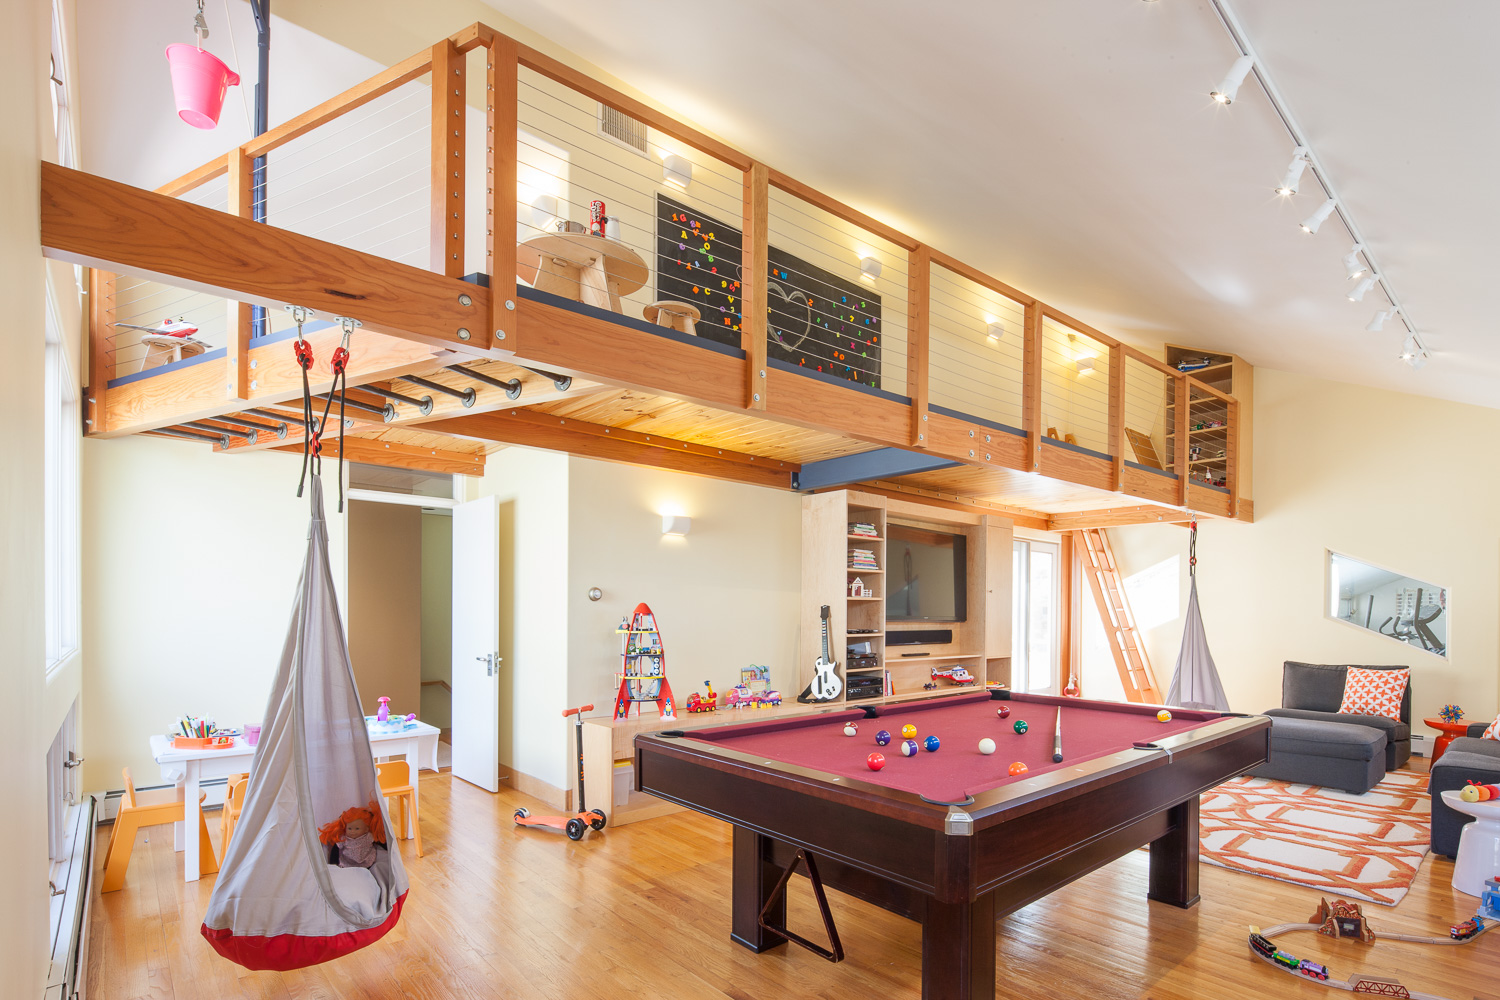  Cantilevered kids’ playroom loft with trap-door ladder access, monkey bars, and well wheel. 